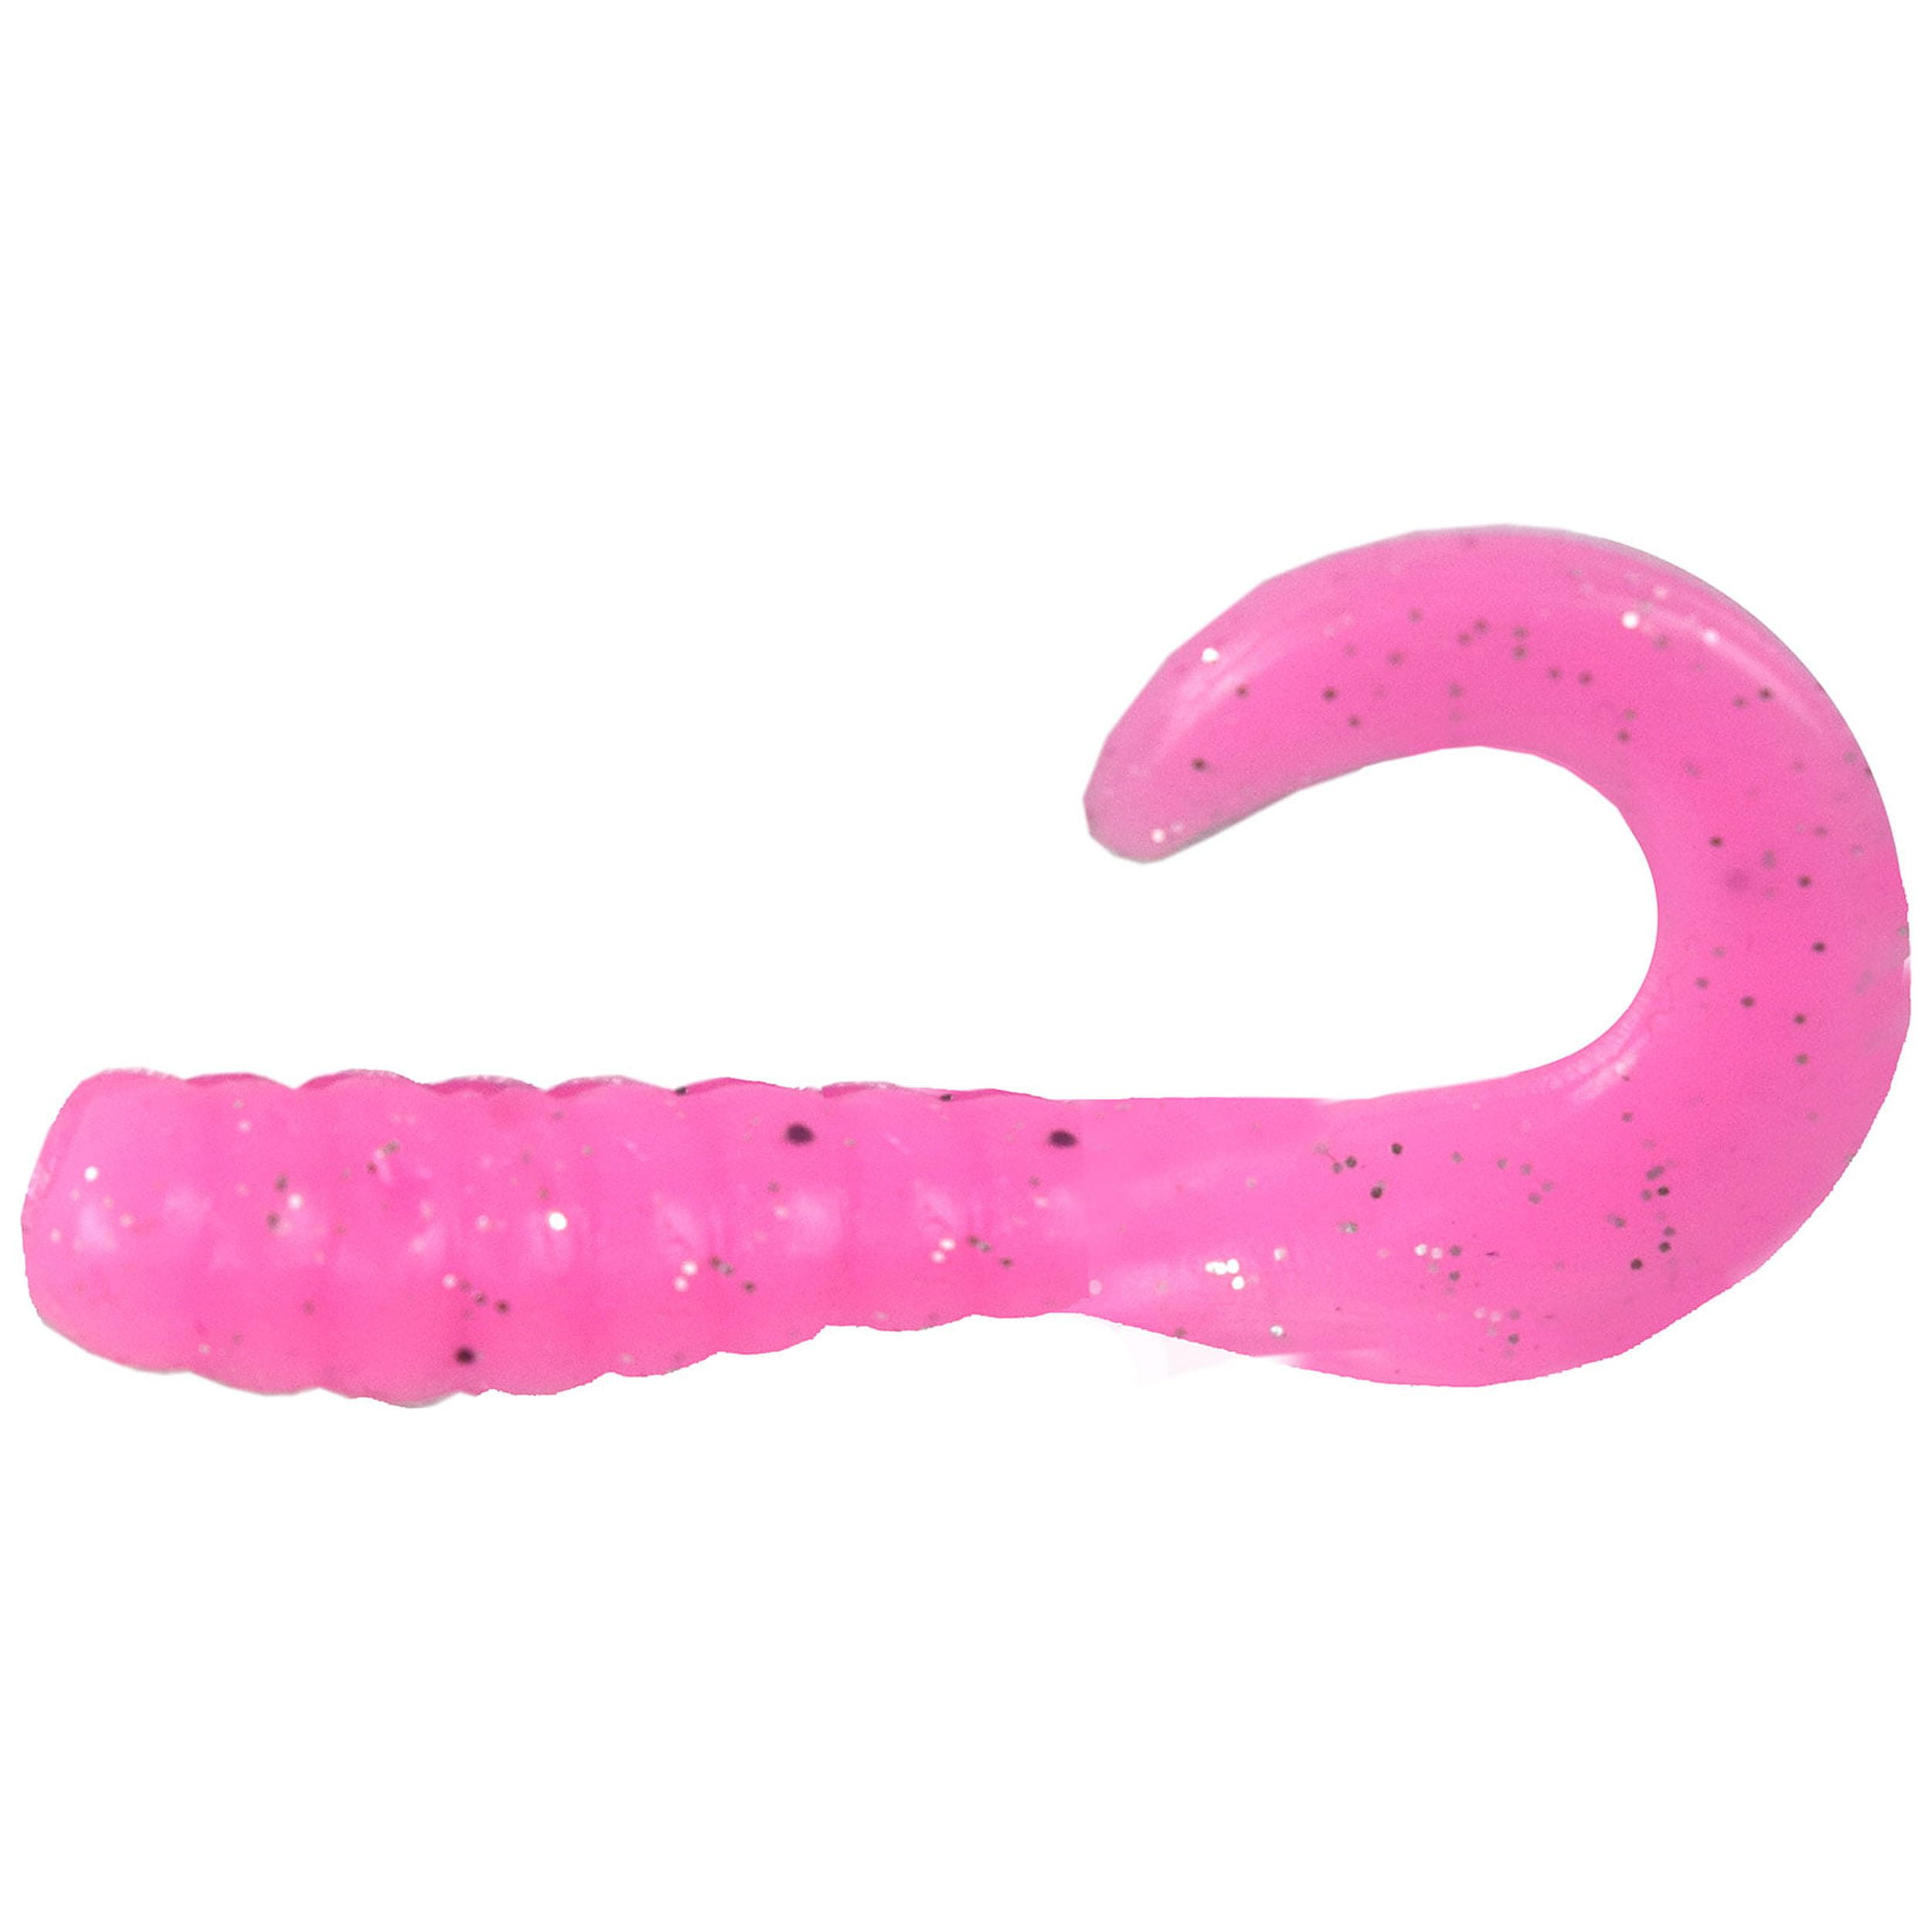 4 Curly Tail Grub (12 pack) – Rite Angler